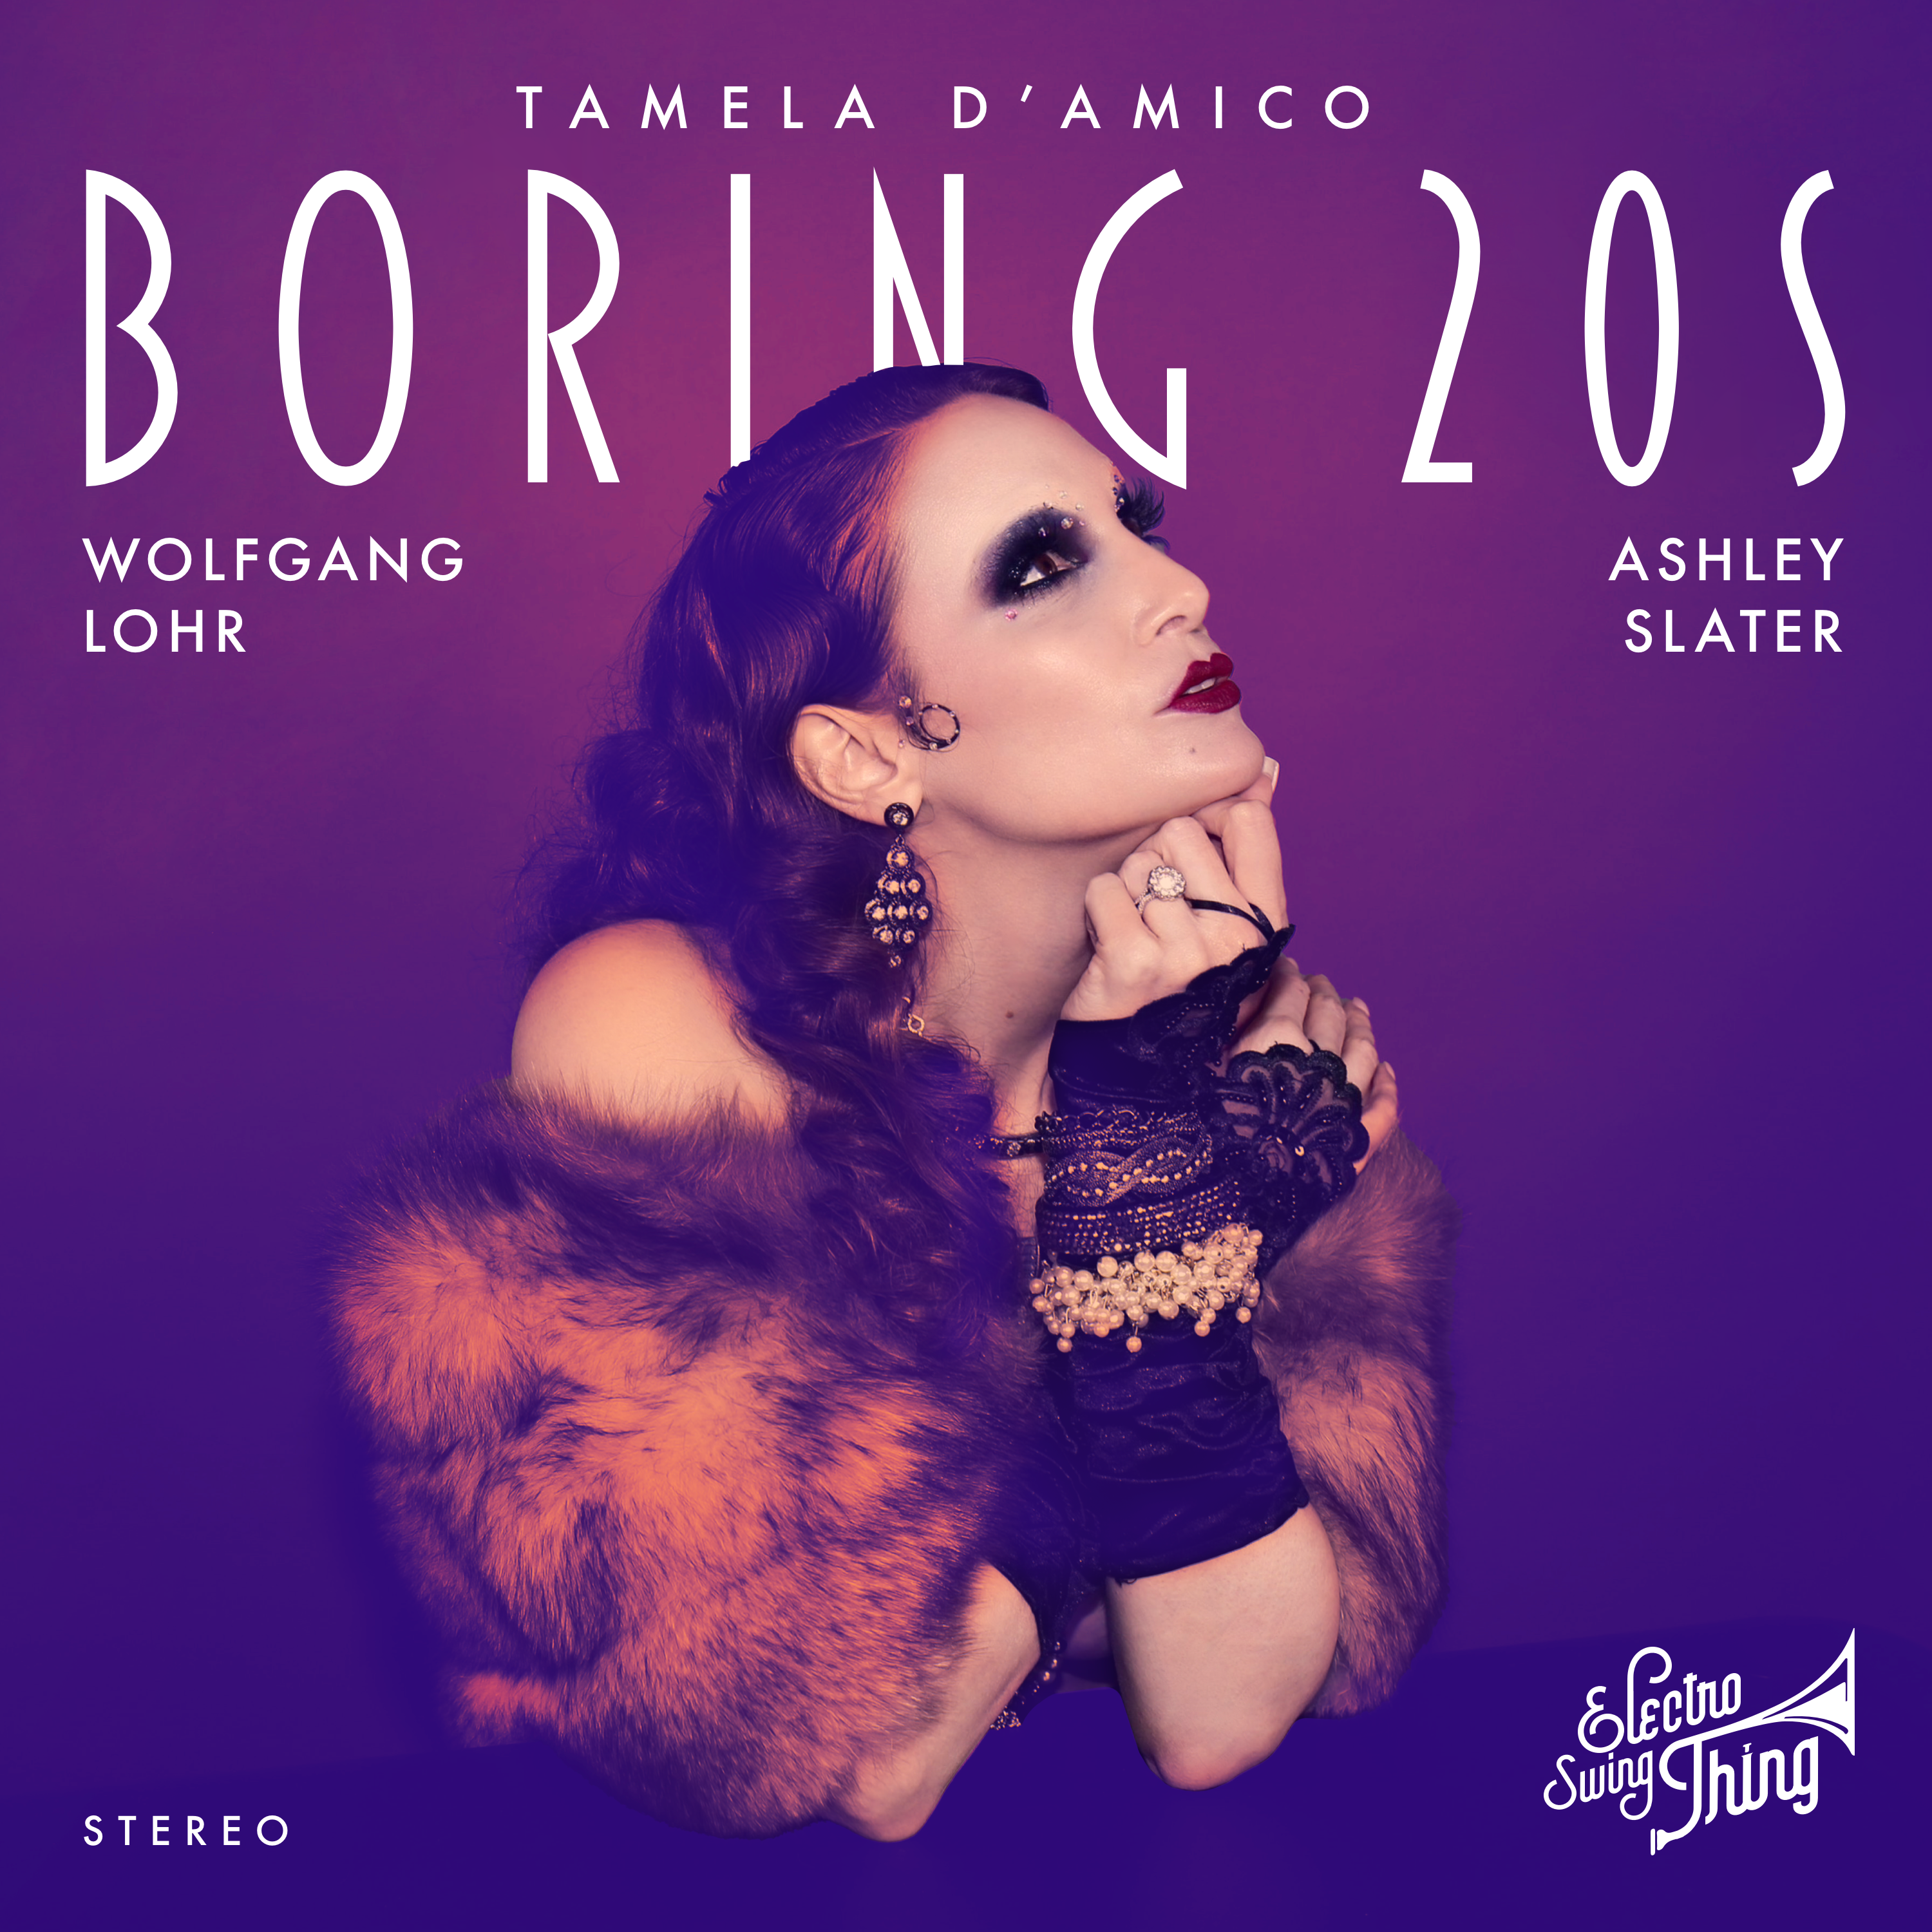 ELECTRO SWING PREMIERE: ‘Boring 20s’ is the fantastic and uplifting new single from ‘Tamela D’Amico’.